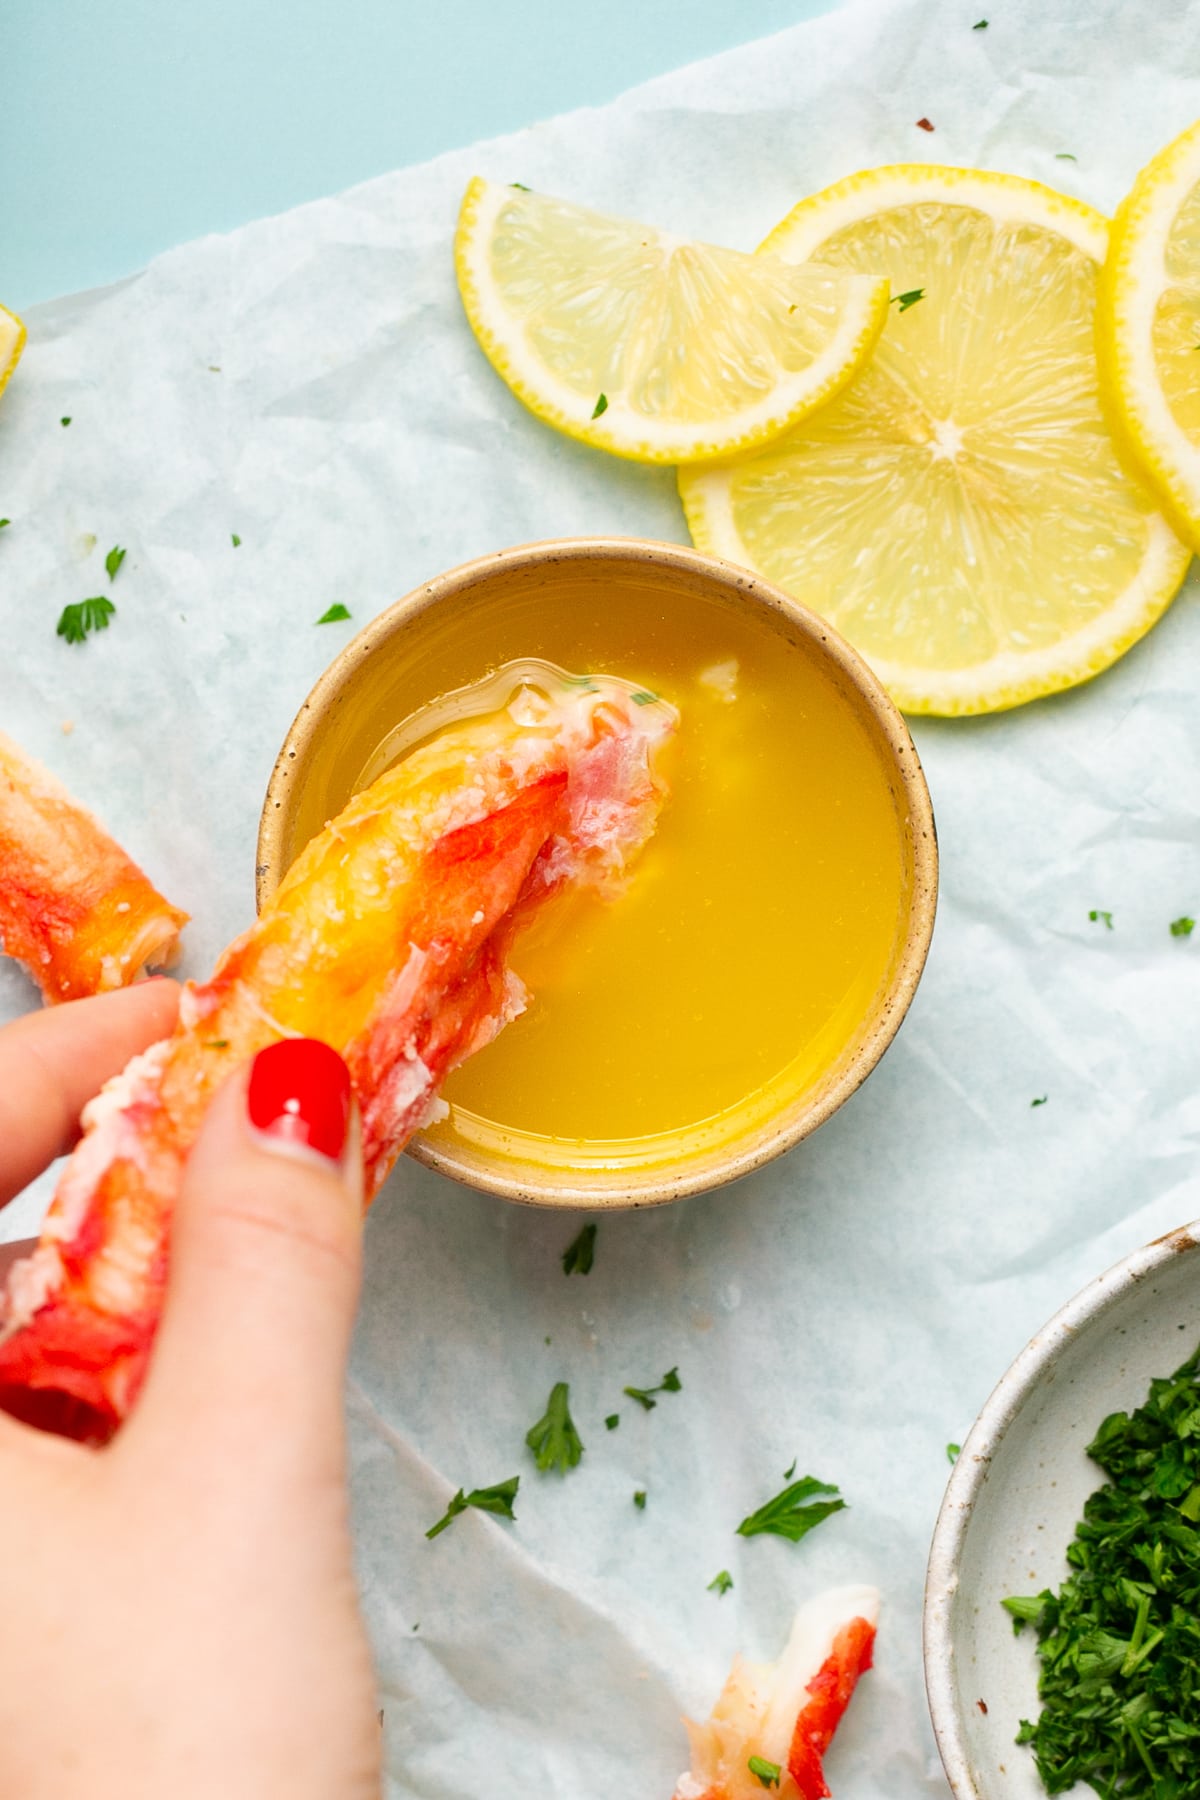 Crab Legs with melted butter and lemon wedges